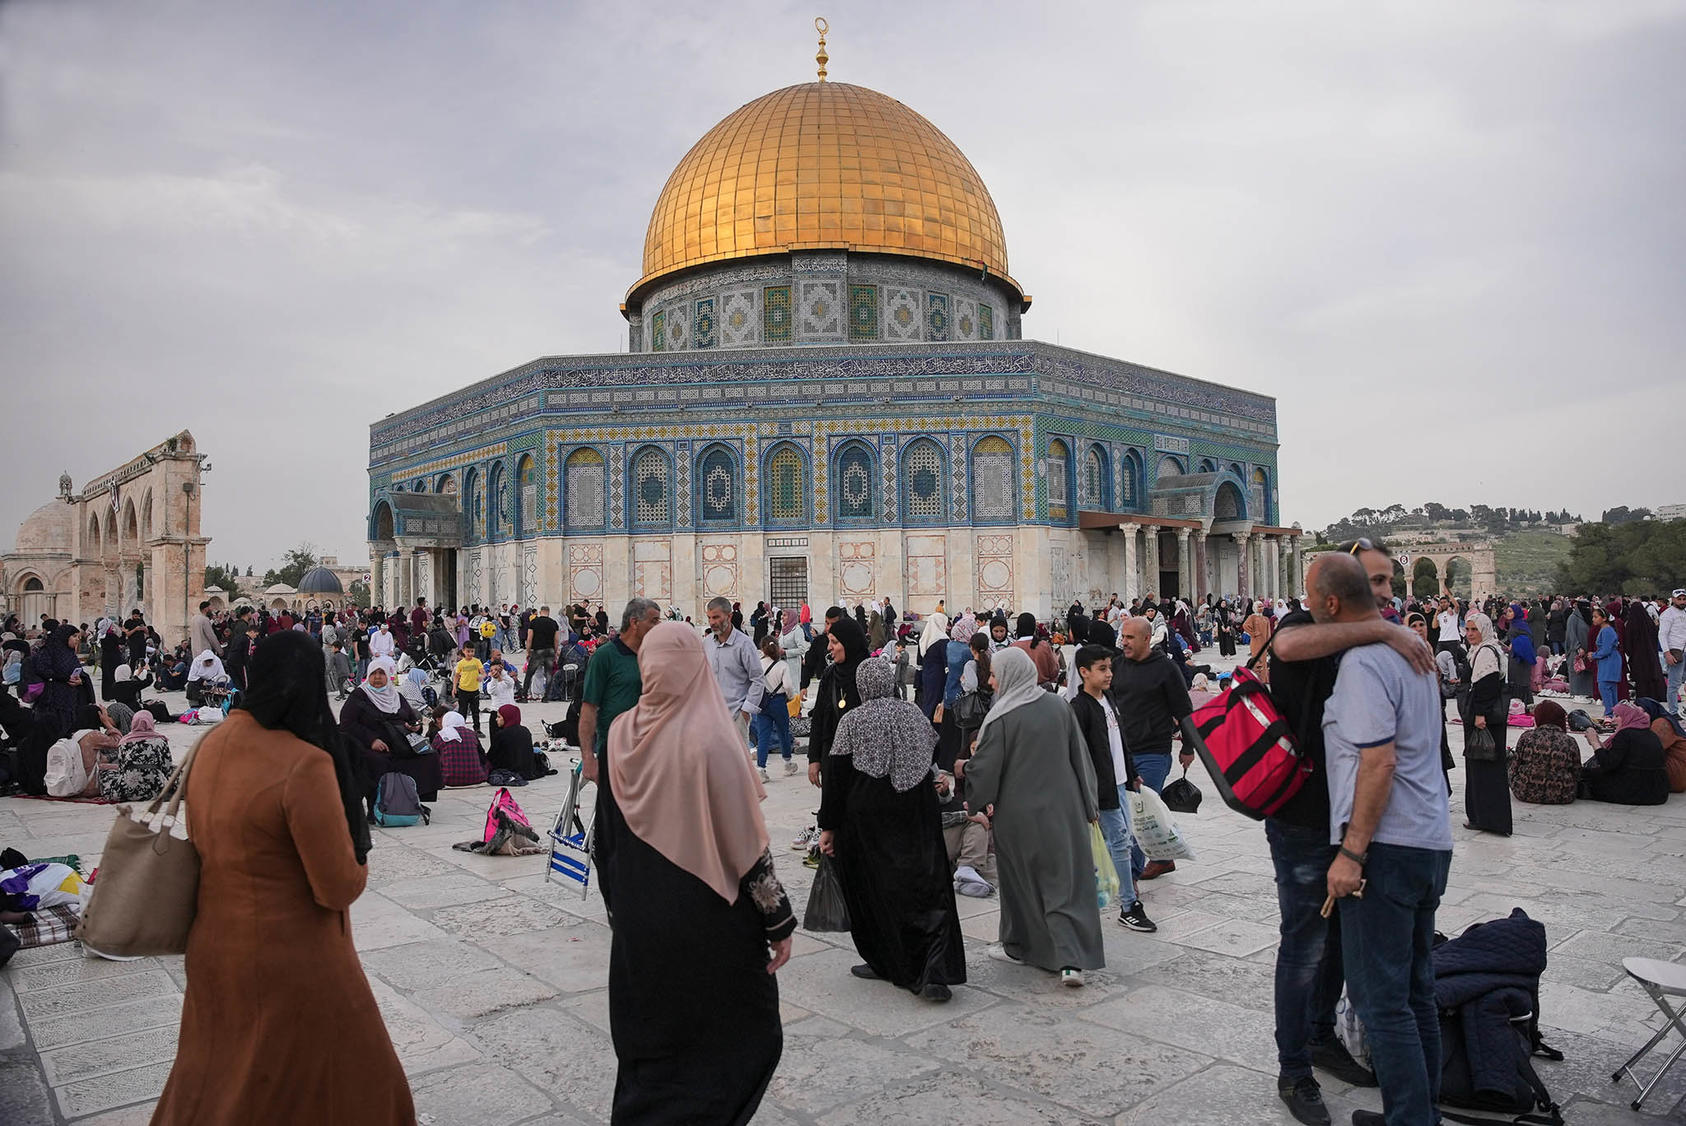 Al-Aqsa Mosque in Jerusalem, April 22, 2022. Amid converging religious holidays, Israeli-Palestinian tensions in Jerusalem led to attacks from Lebanon and Syria, resulting in the risk of regional conflagration. (Afif Amireh/The New York Times)